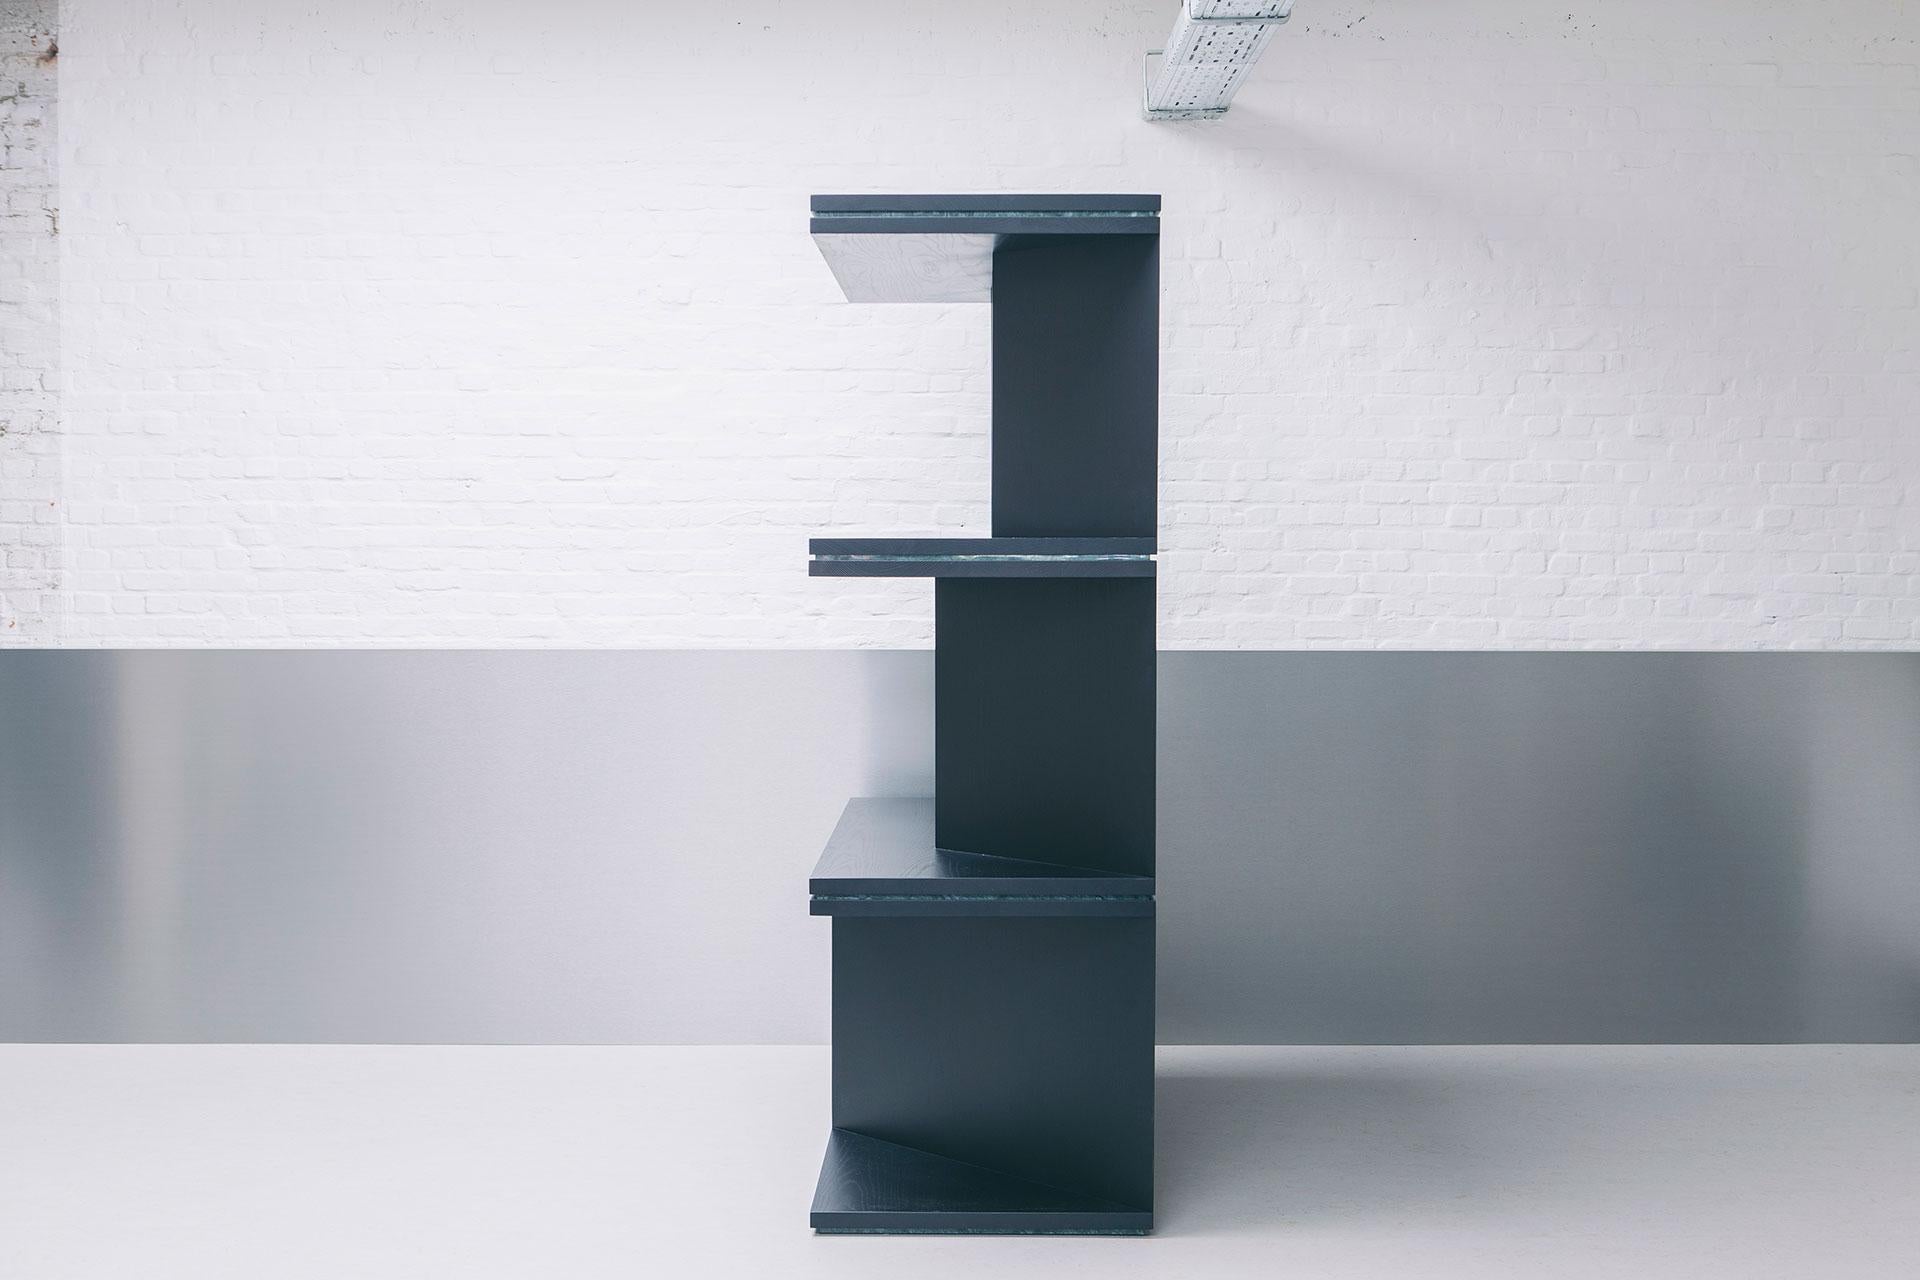 Oblique 01.1, a room divider or bookcase that knows how to divide every space, without losing the sense of spaciousness. Inspired by Le Corbusier’s Tower of Shadows, the oblique subdivisions make this bookshelf unique and recognizable. The vertical